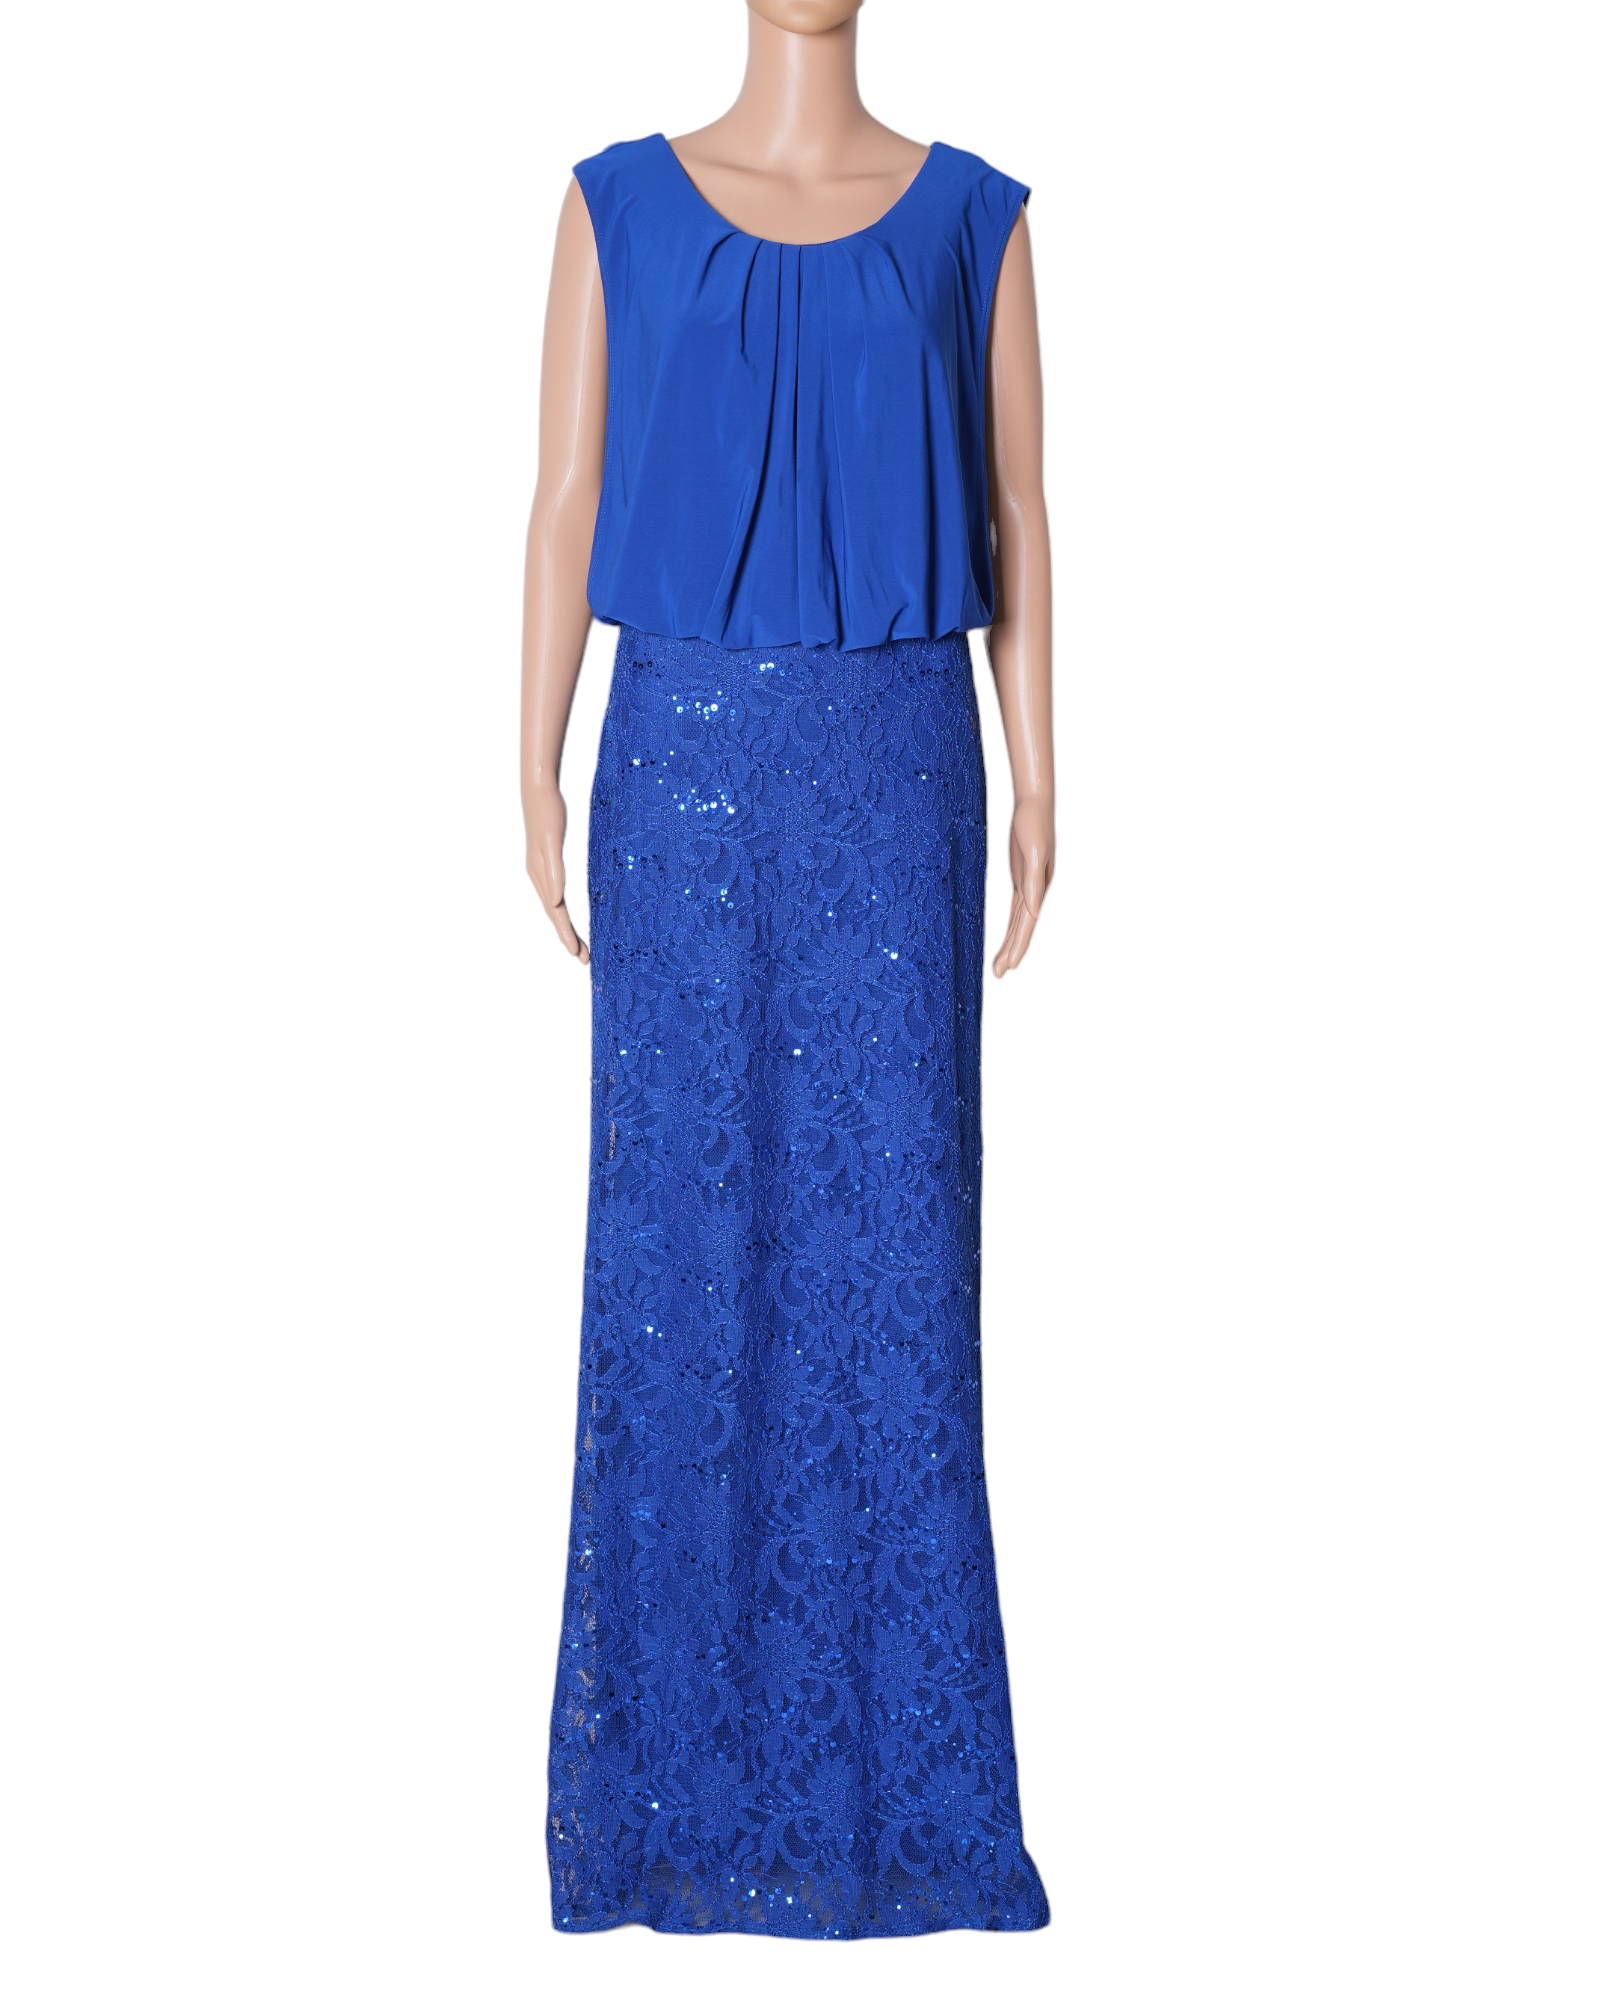 DFI Fitted Lace Dress In Royal Blue